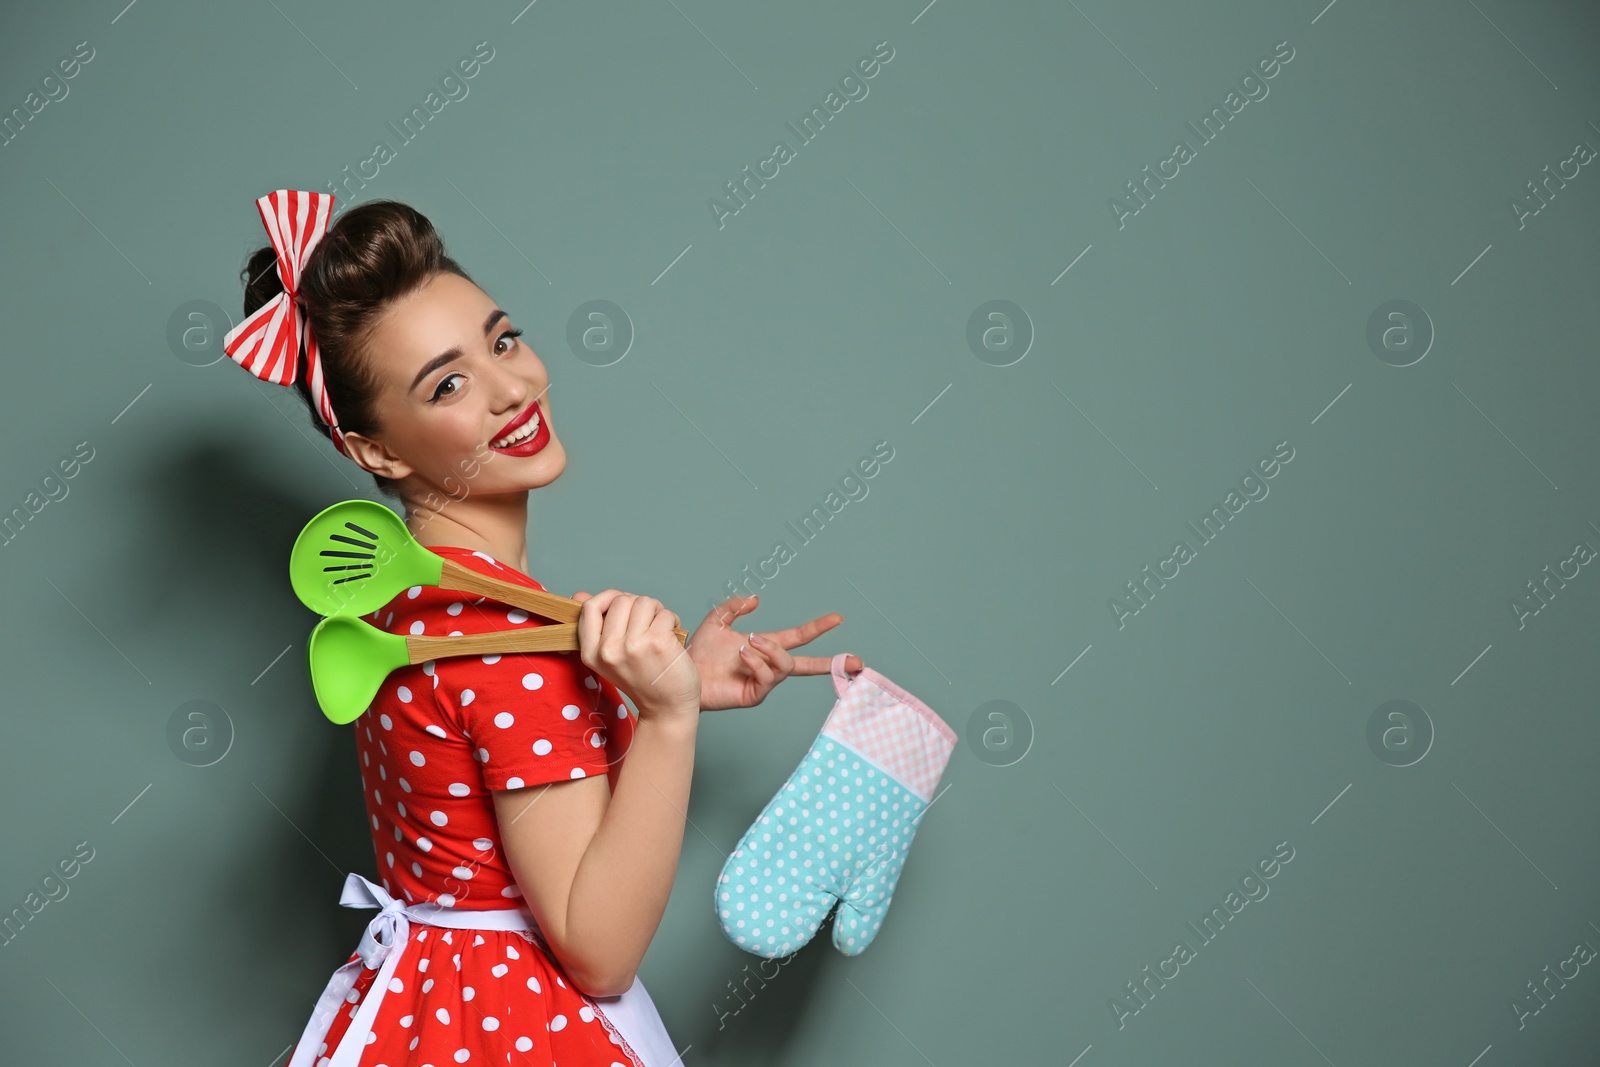 Photo of Funny young housewife with oven mitten and cooking utensils on color background